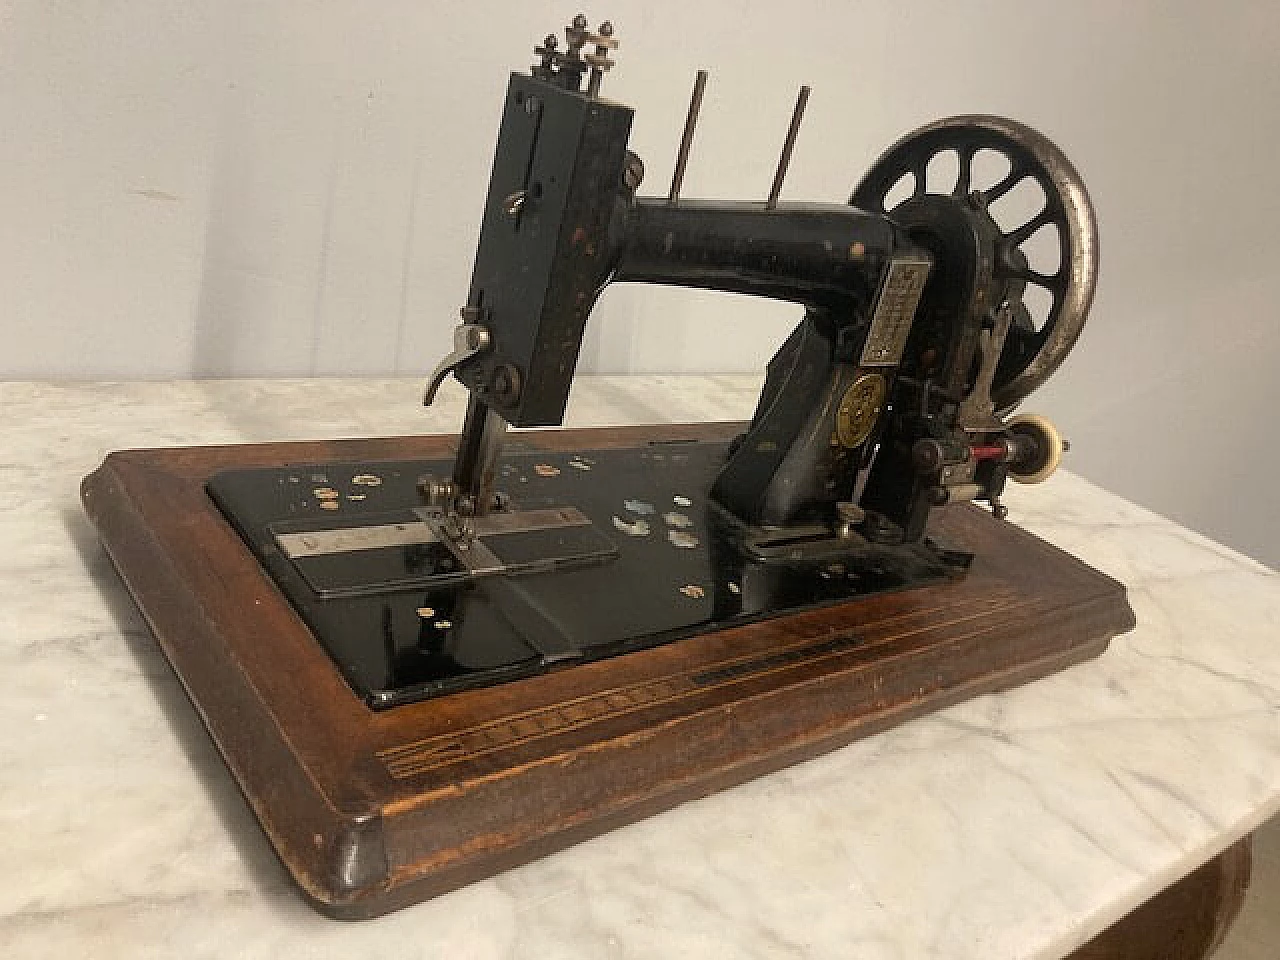 Tabletop sewing machine with mother-of-pearl inlays, late 19th century 8